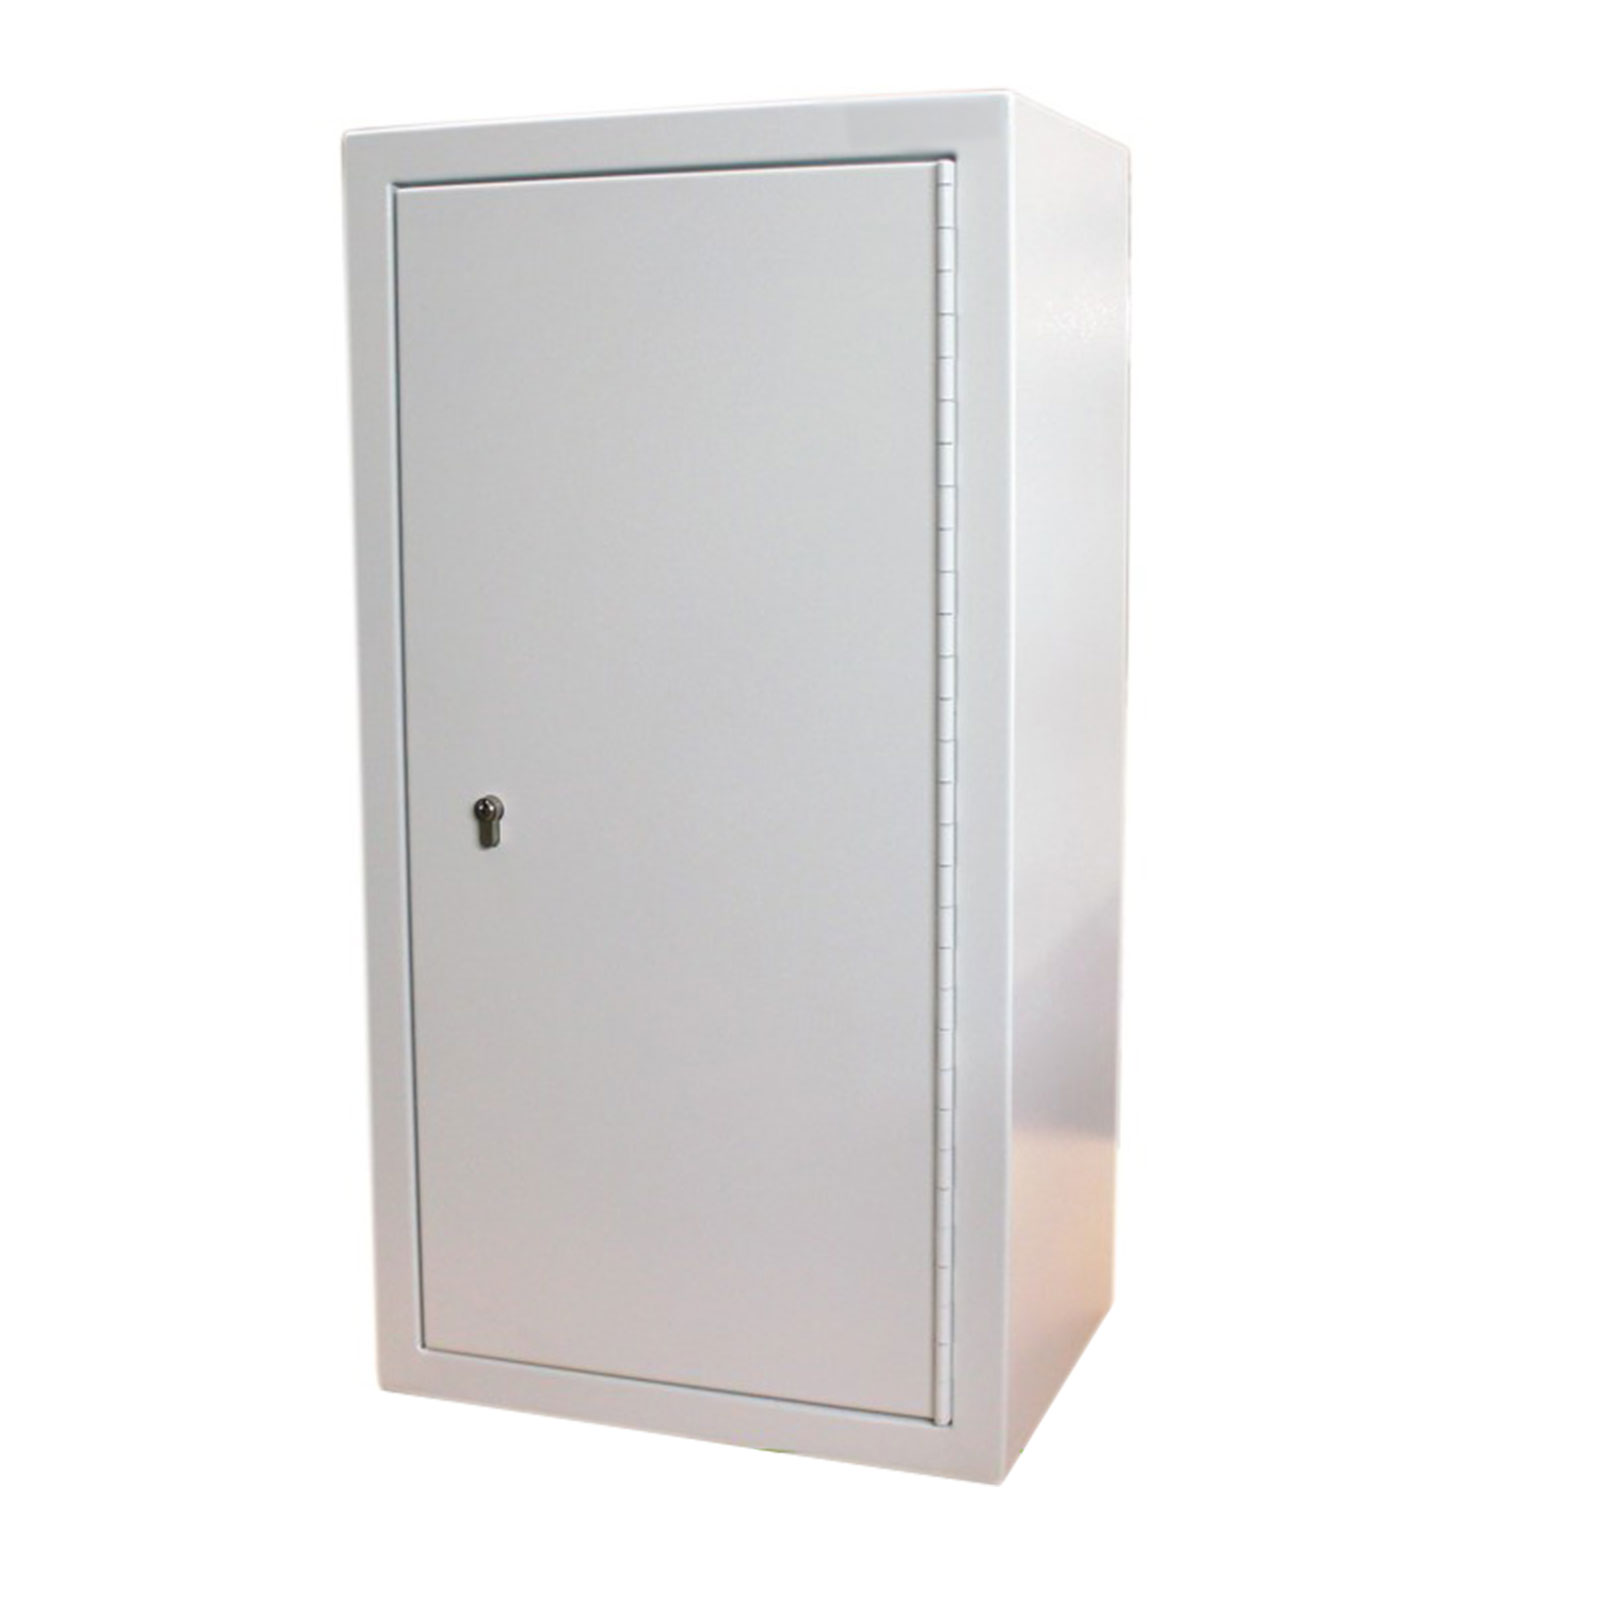 FPD 12367 Controlled Drugs Cabinet 127.5 Litre door closed